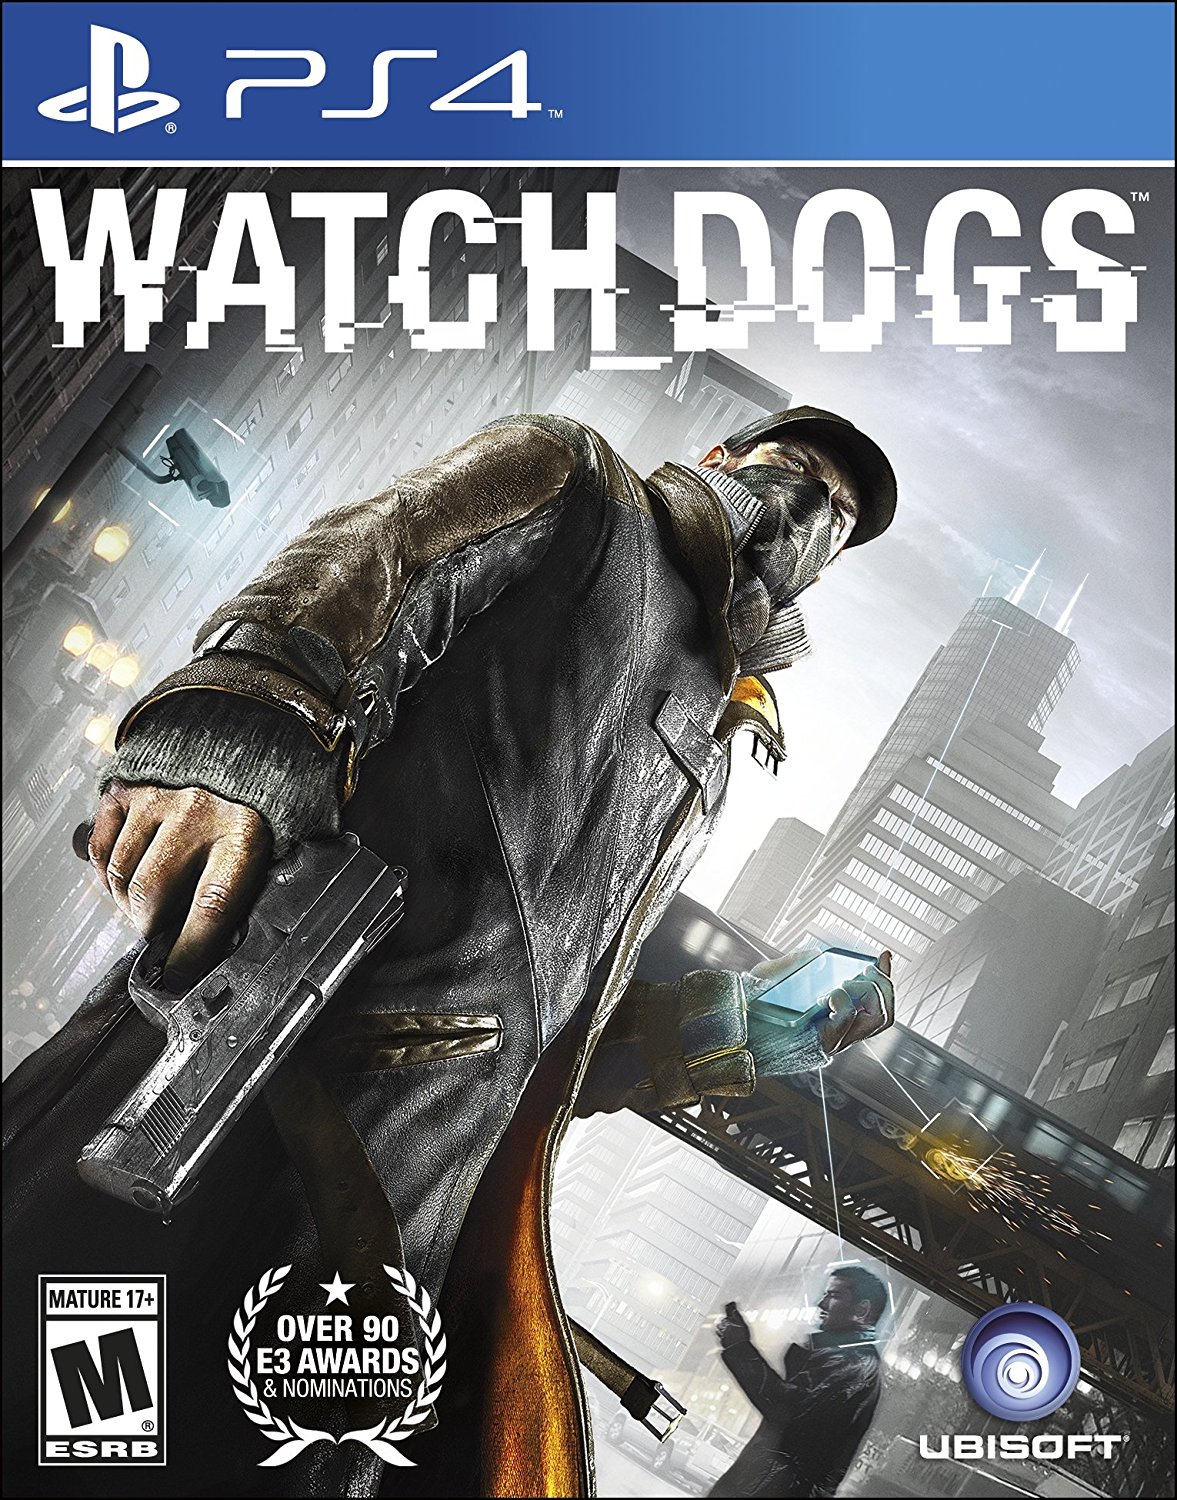 sony-playstation-4-dvd-watch-dogs-ps4